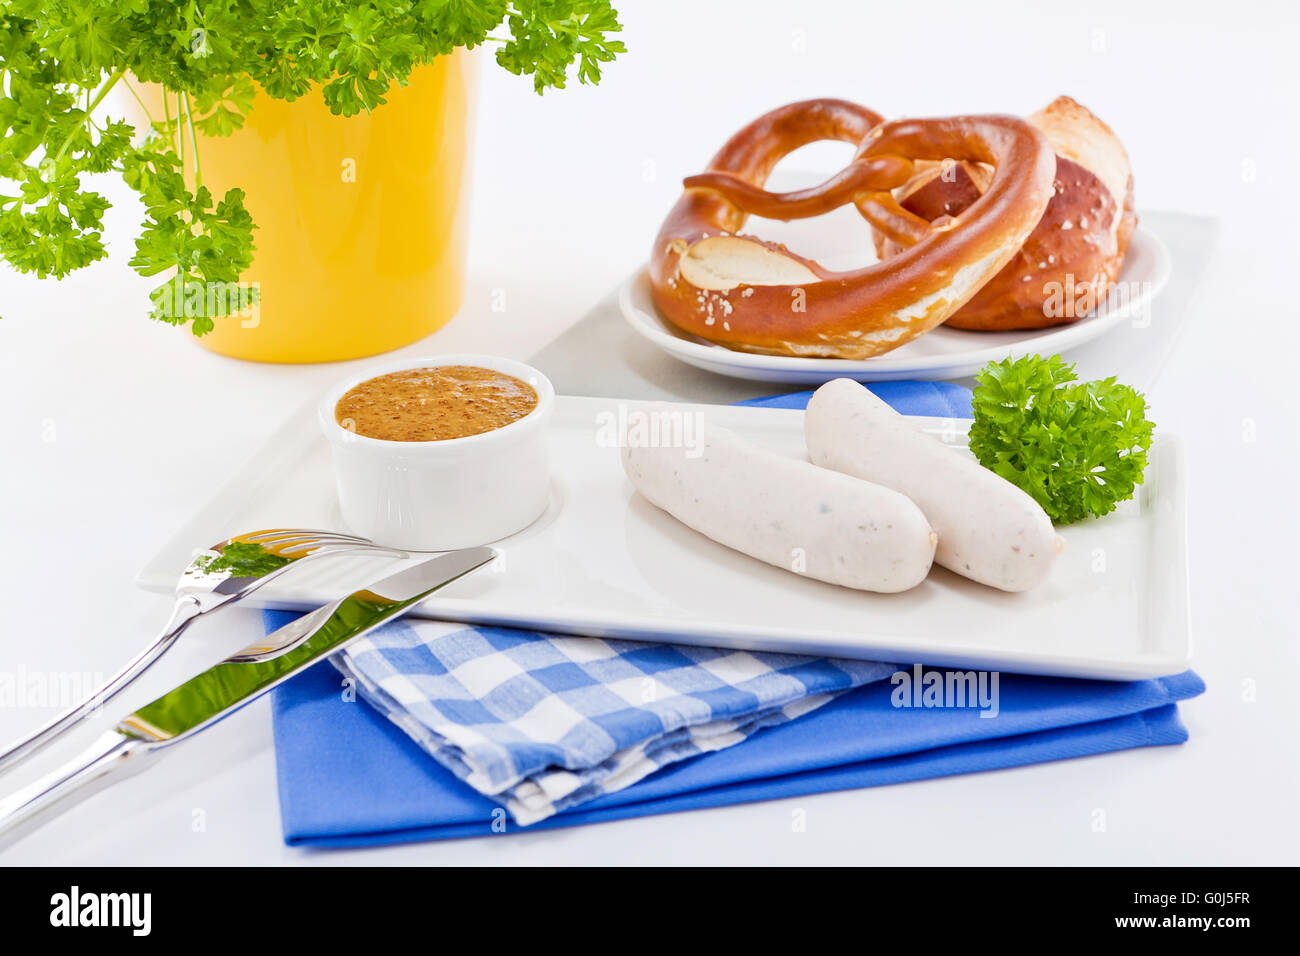 weisswurst white sausages and sweet mustard with pretzel Stock Photo